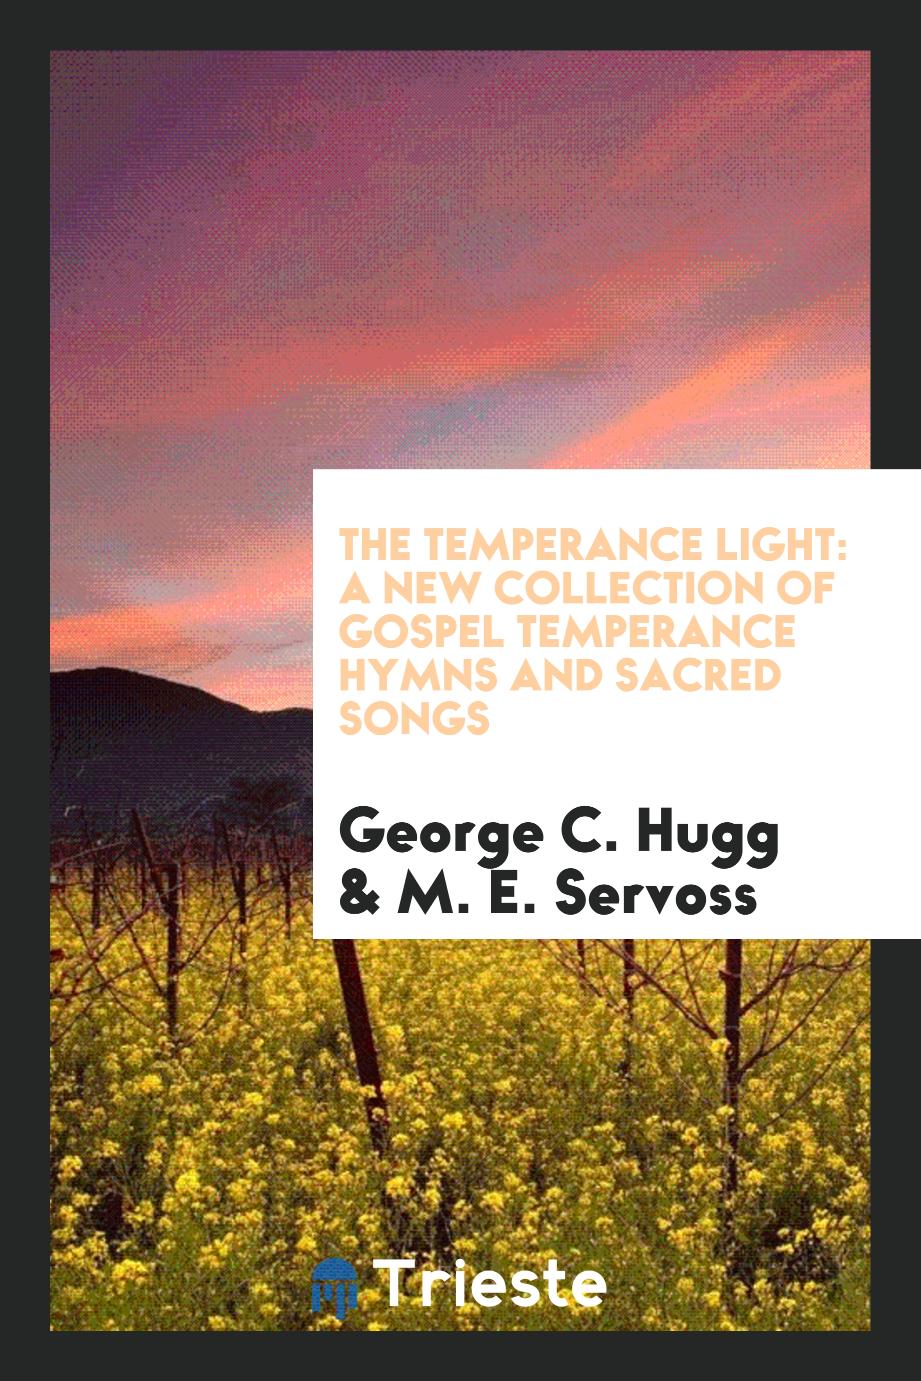 The temperance light: a new collection of Gospel temperance hymns and sacred songs